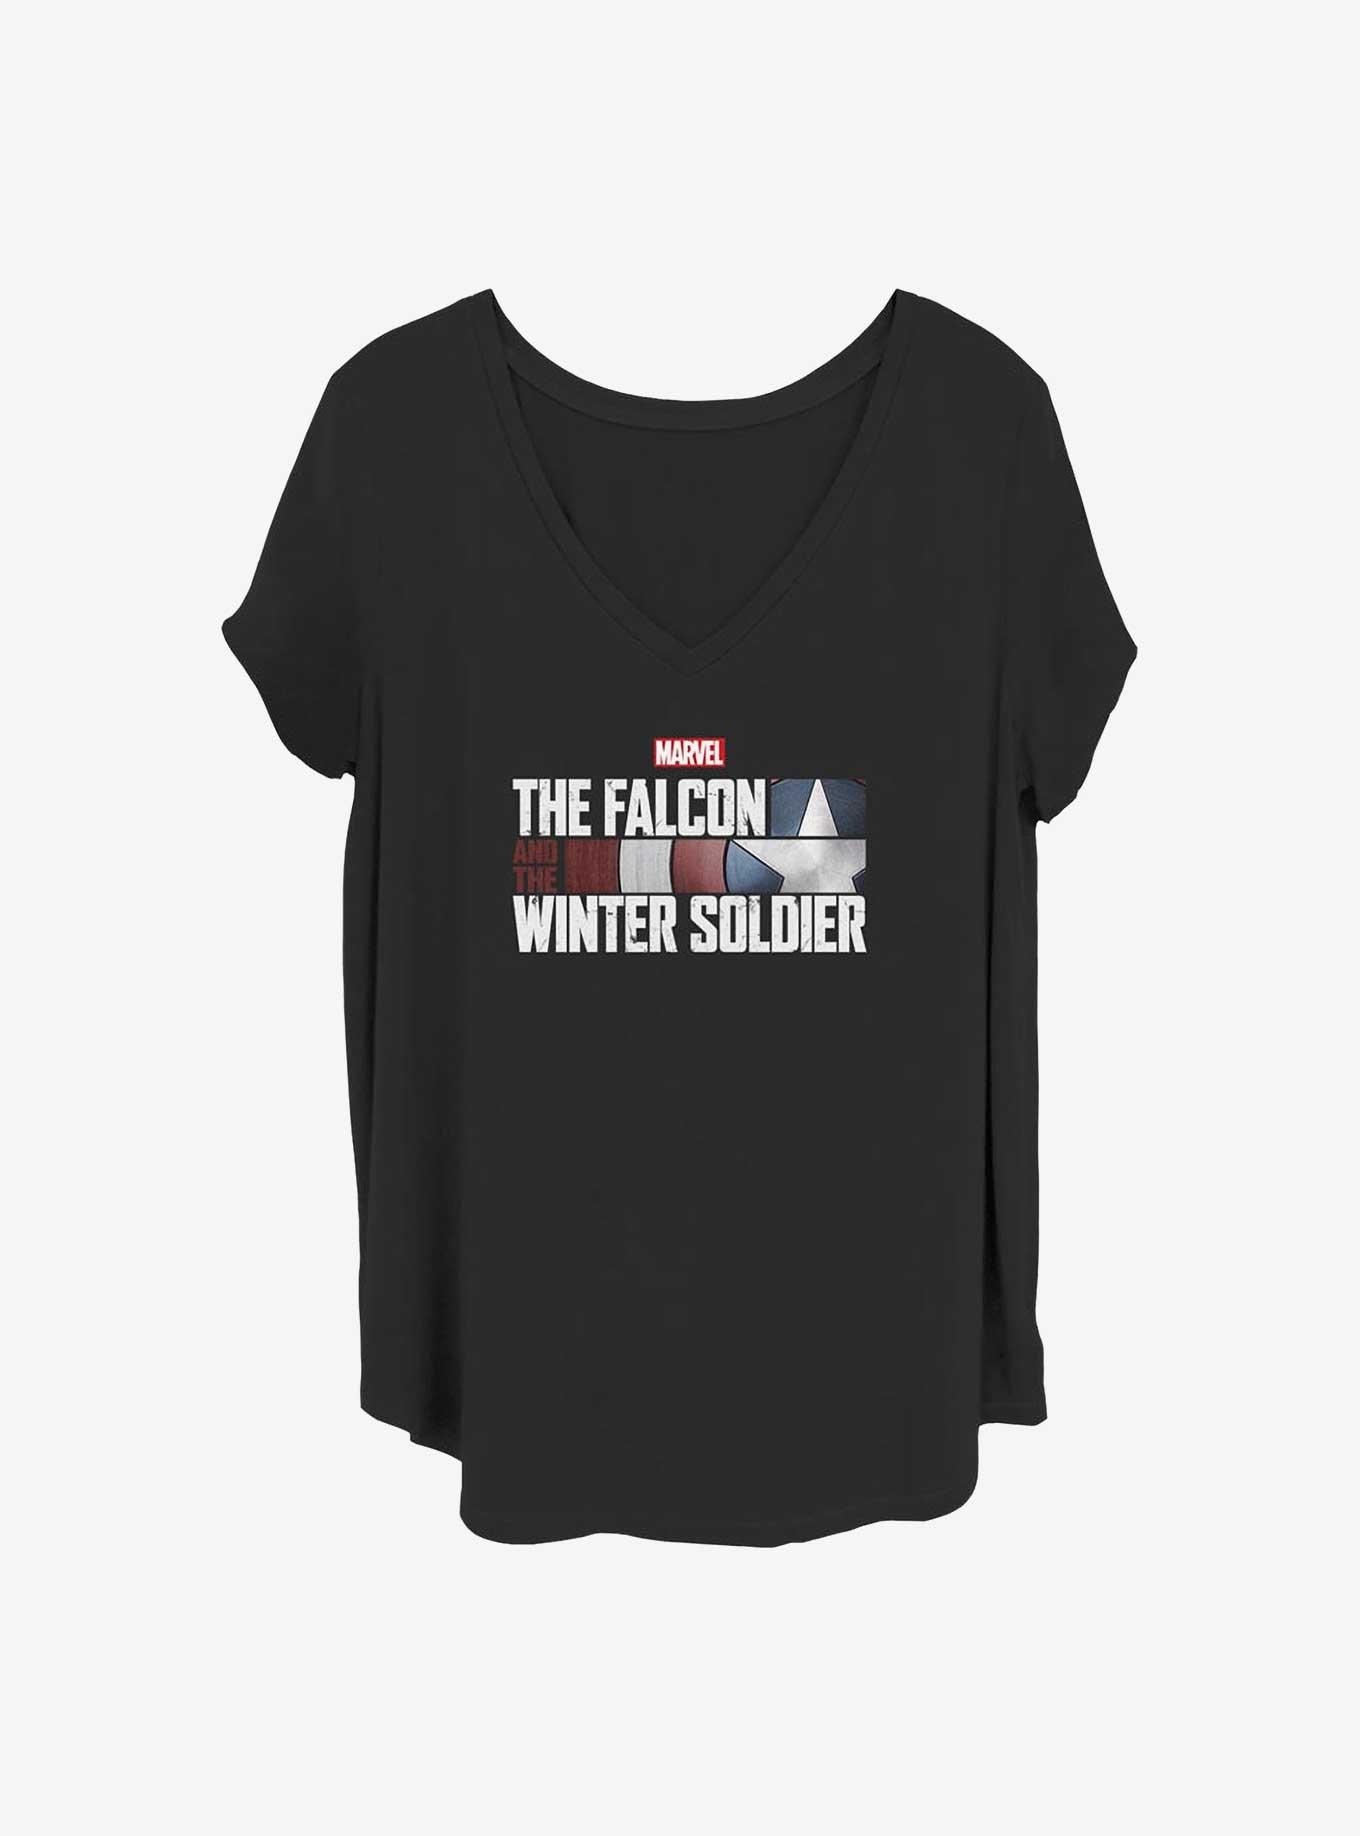 Marvel The Falcon and the Winter Soldier Logo Girls T-Shirt Plus Size, BLACK, hi-res